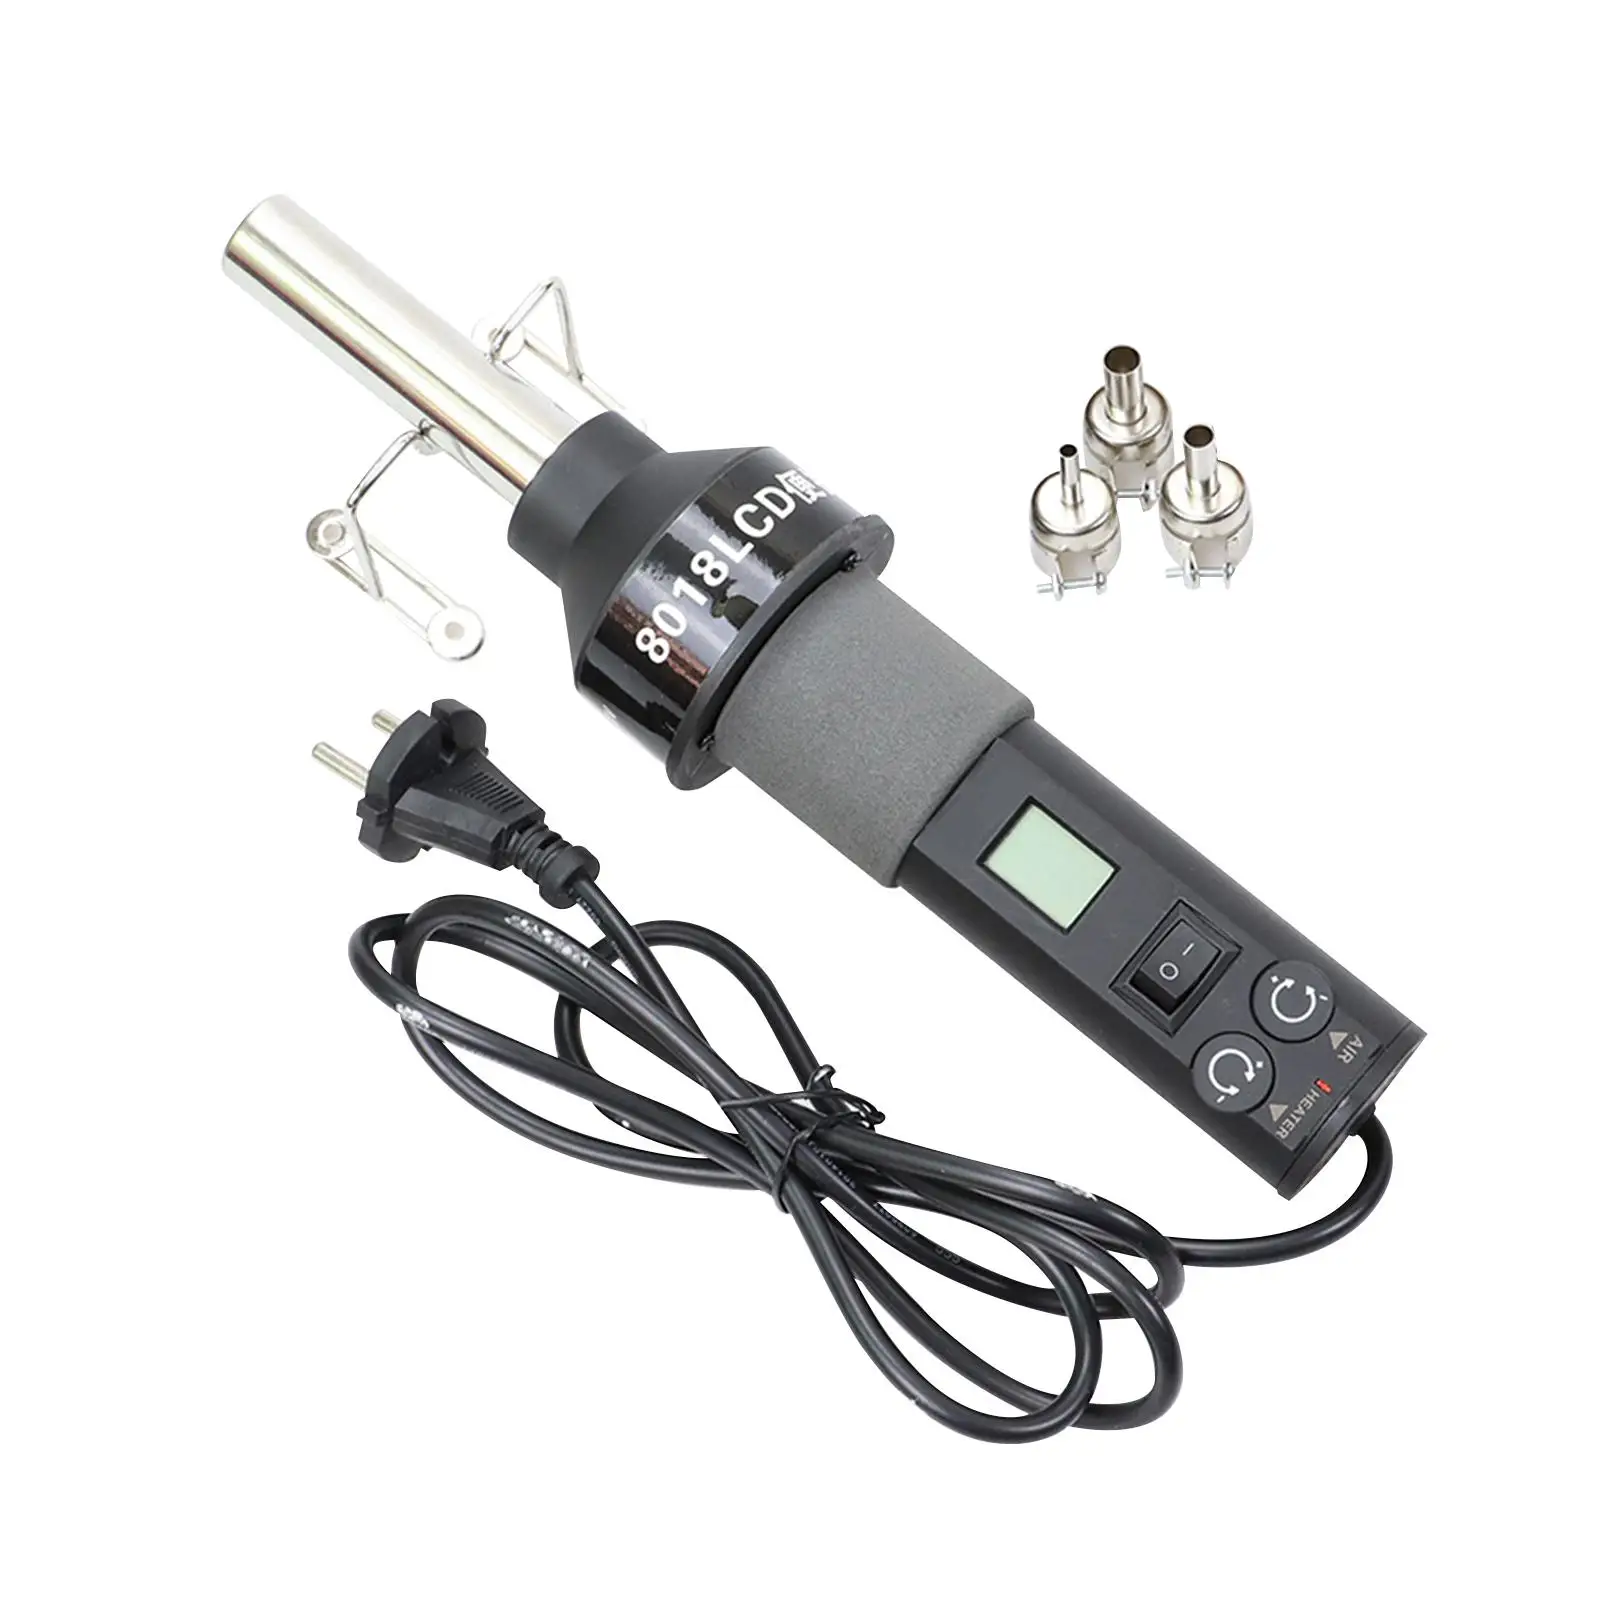 Hot air 110V Temperature Controlled Quick Heat for Rubber Stamp with Nozzle fast heating Handheld Hot air Mini Heat Tool